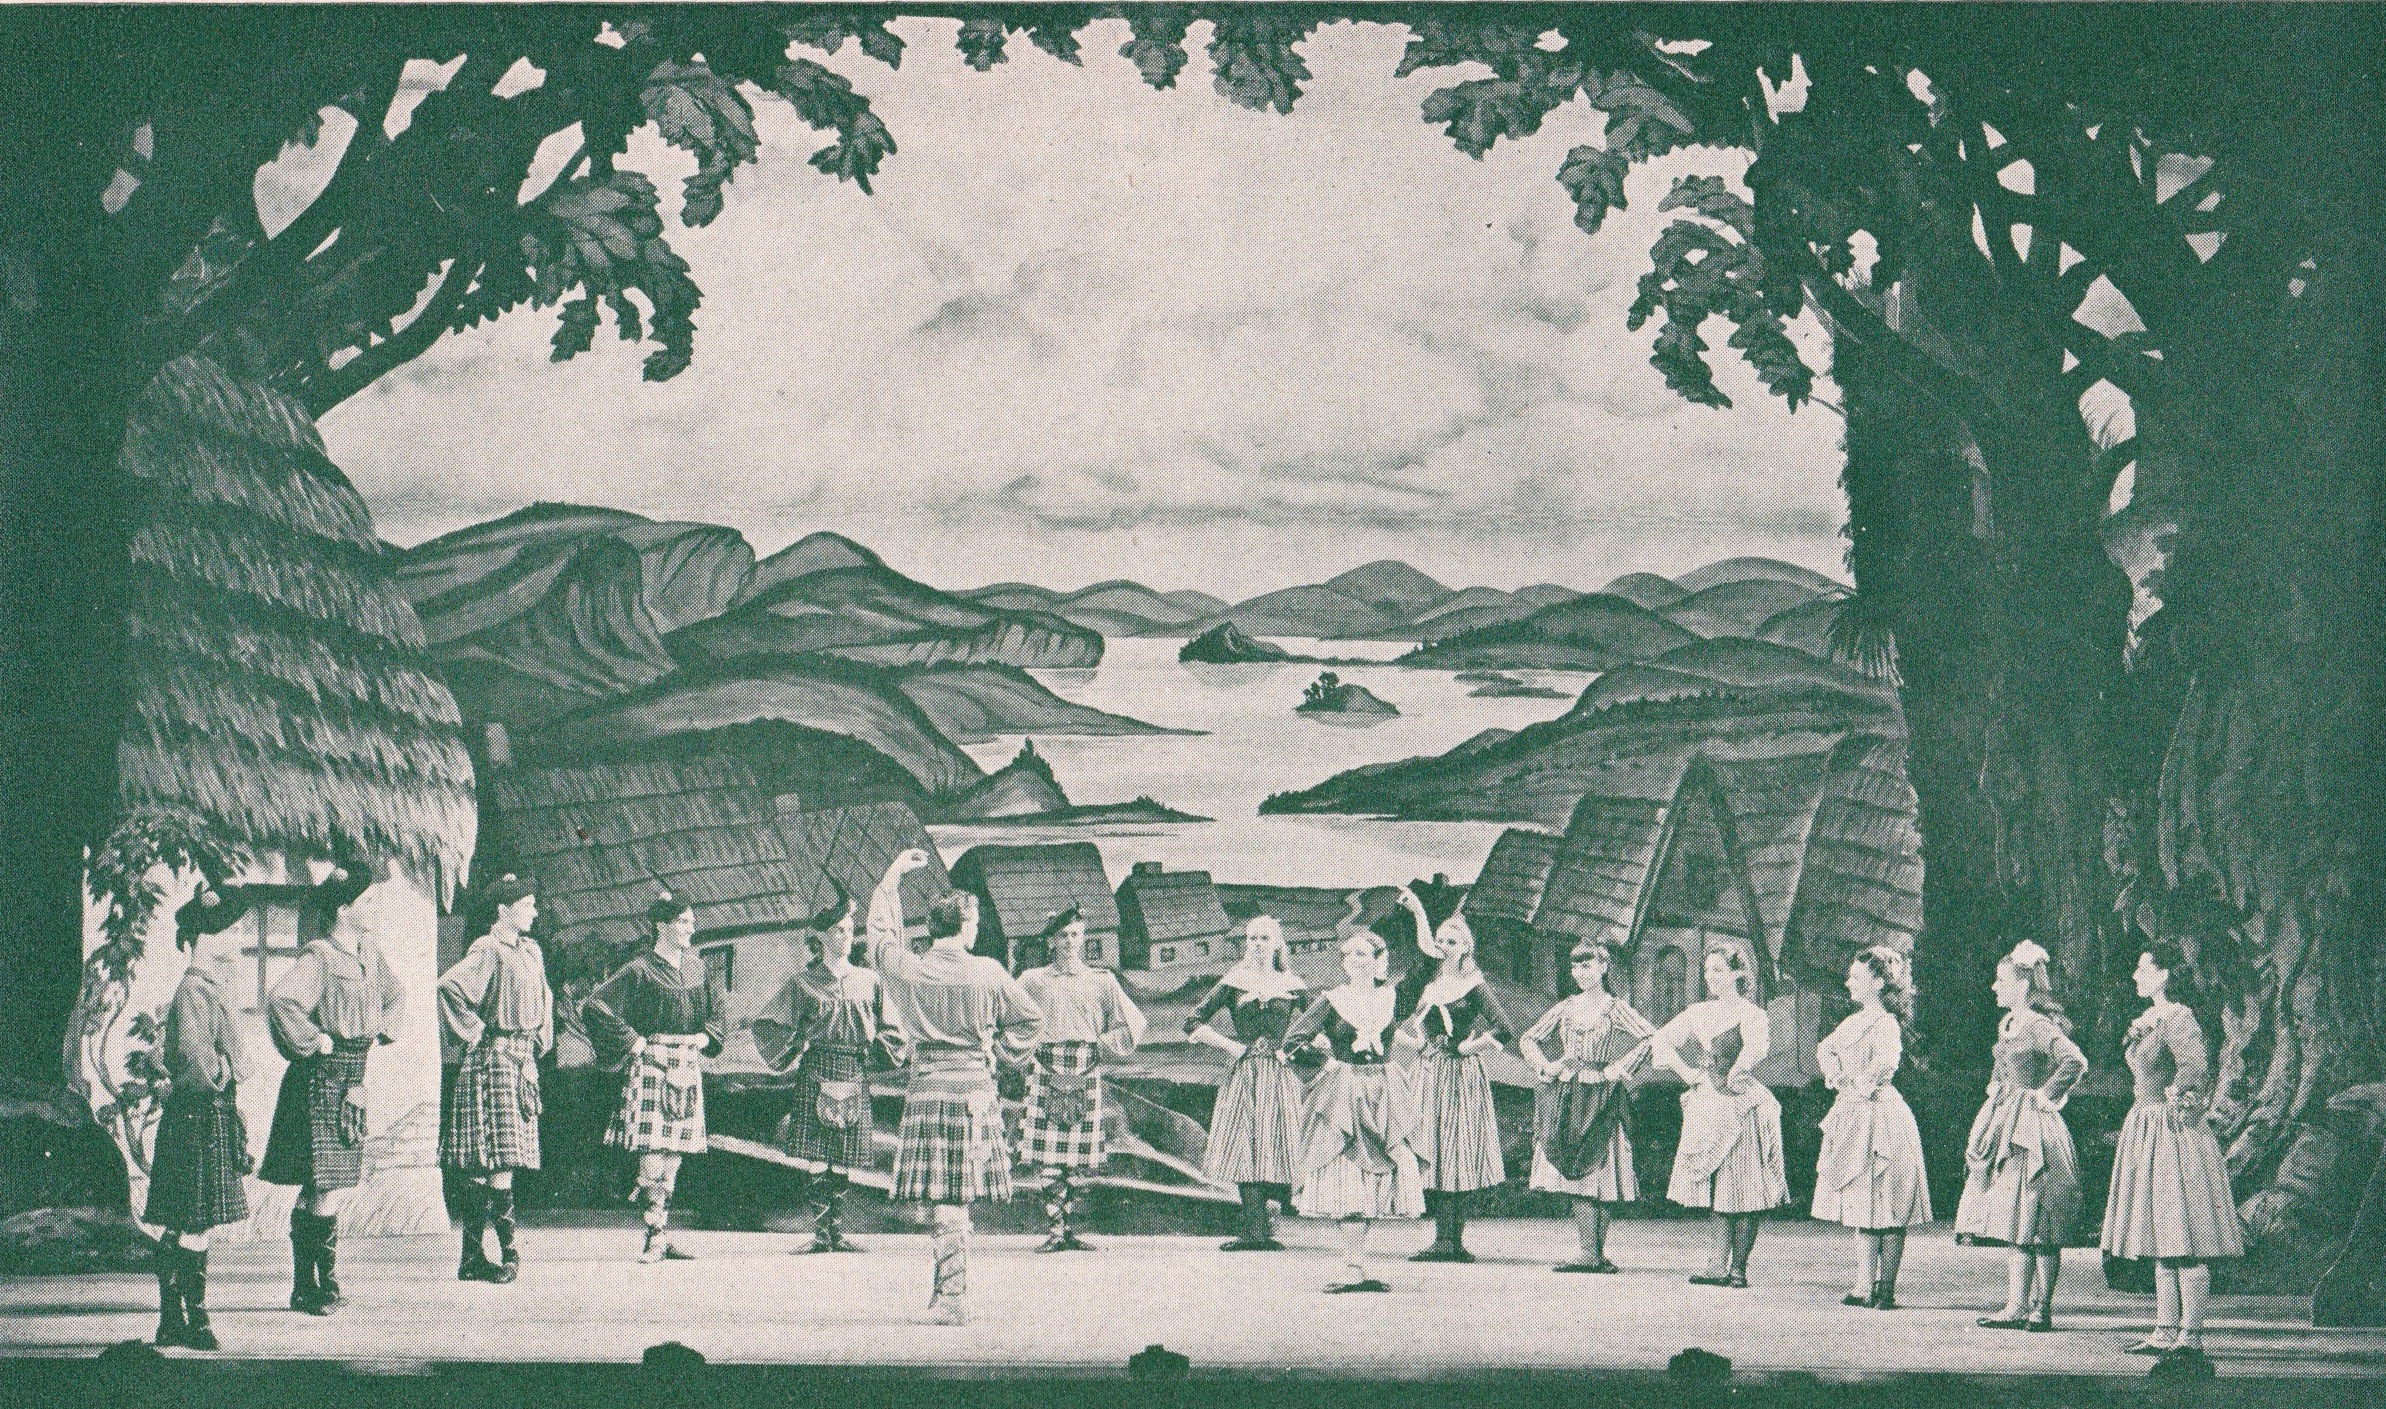 Scene from the original "Brigadoon" production on Broadway.